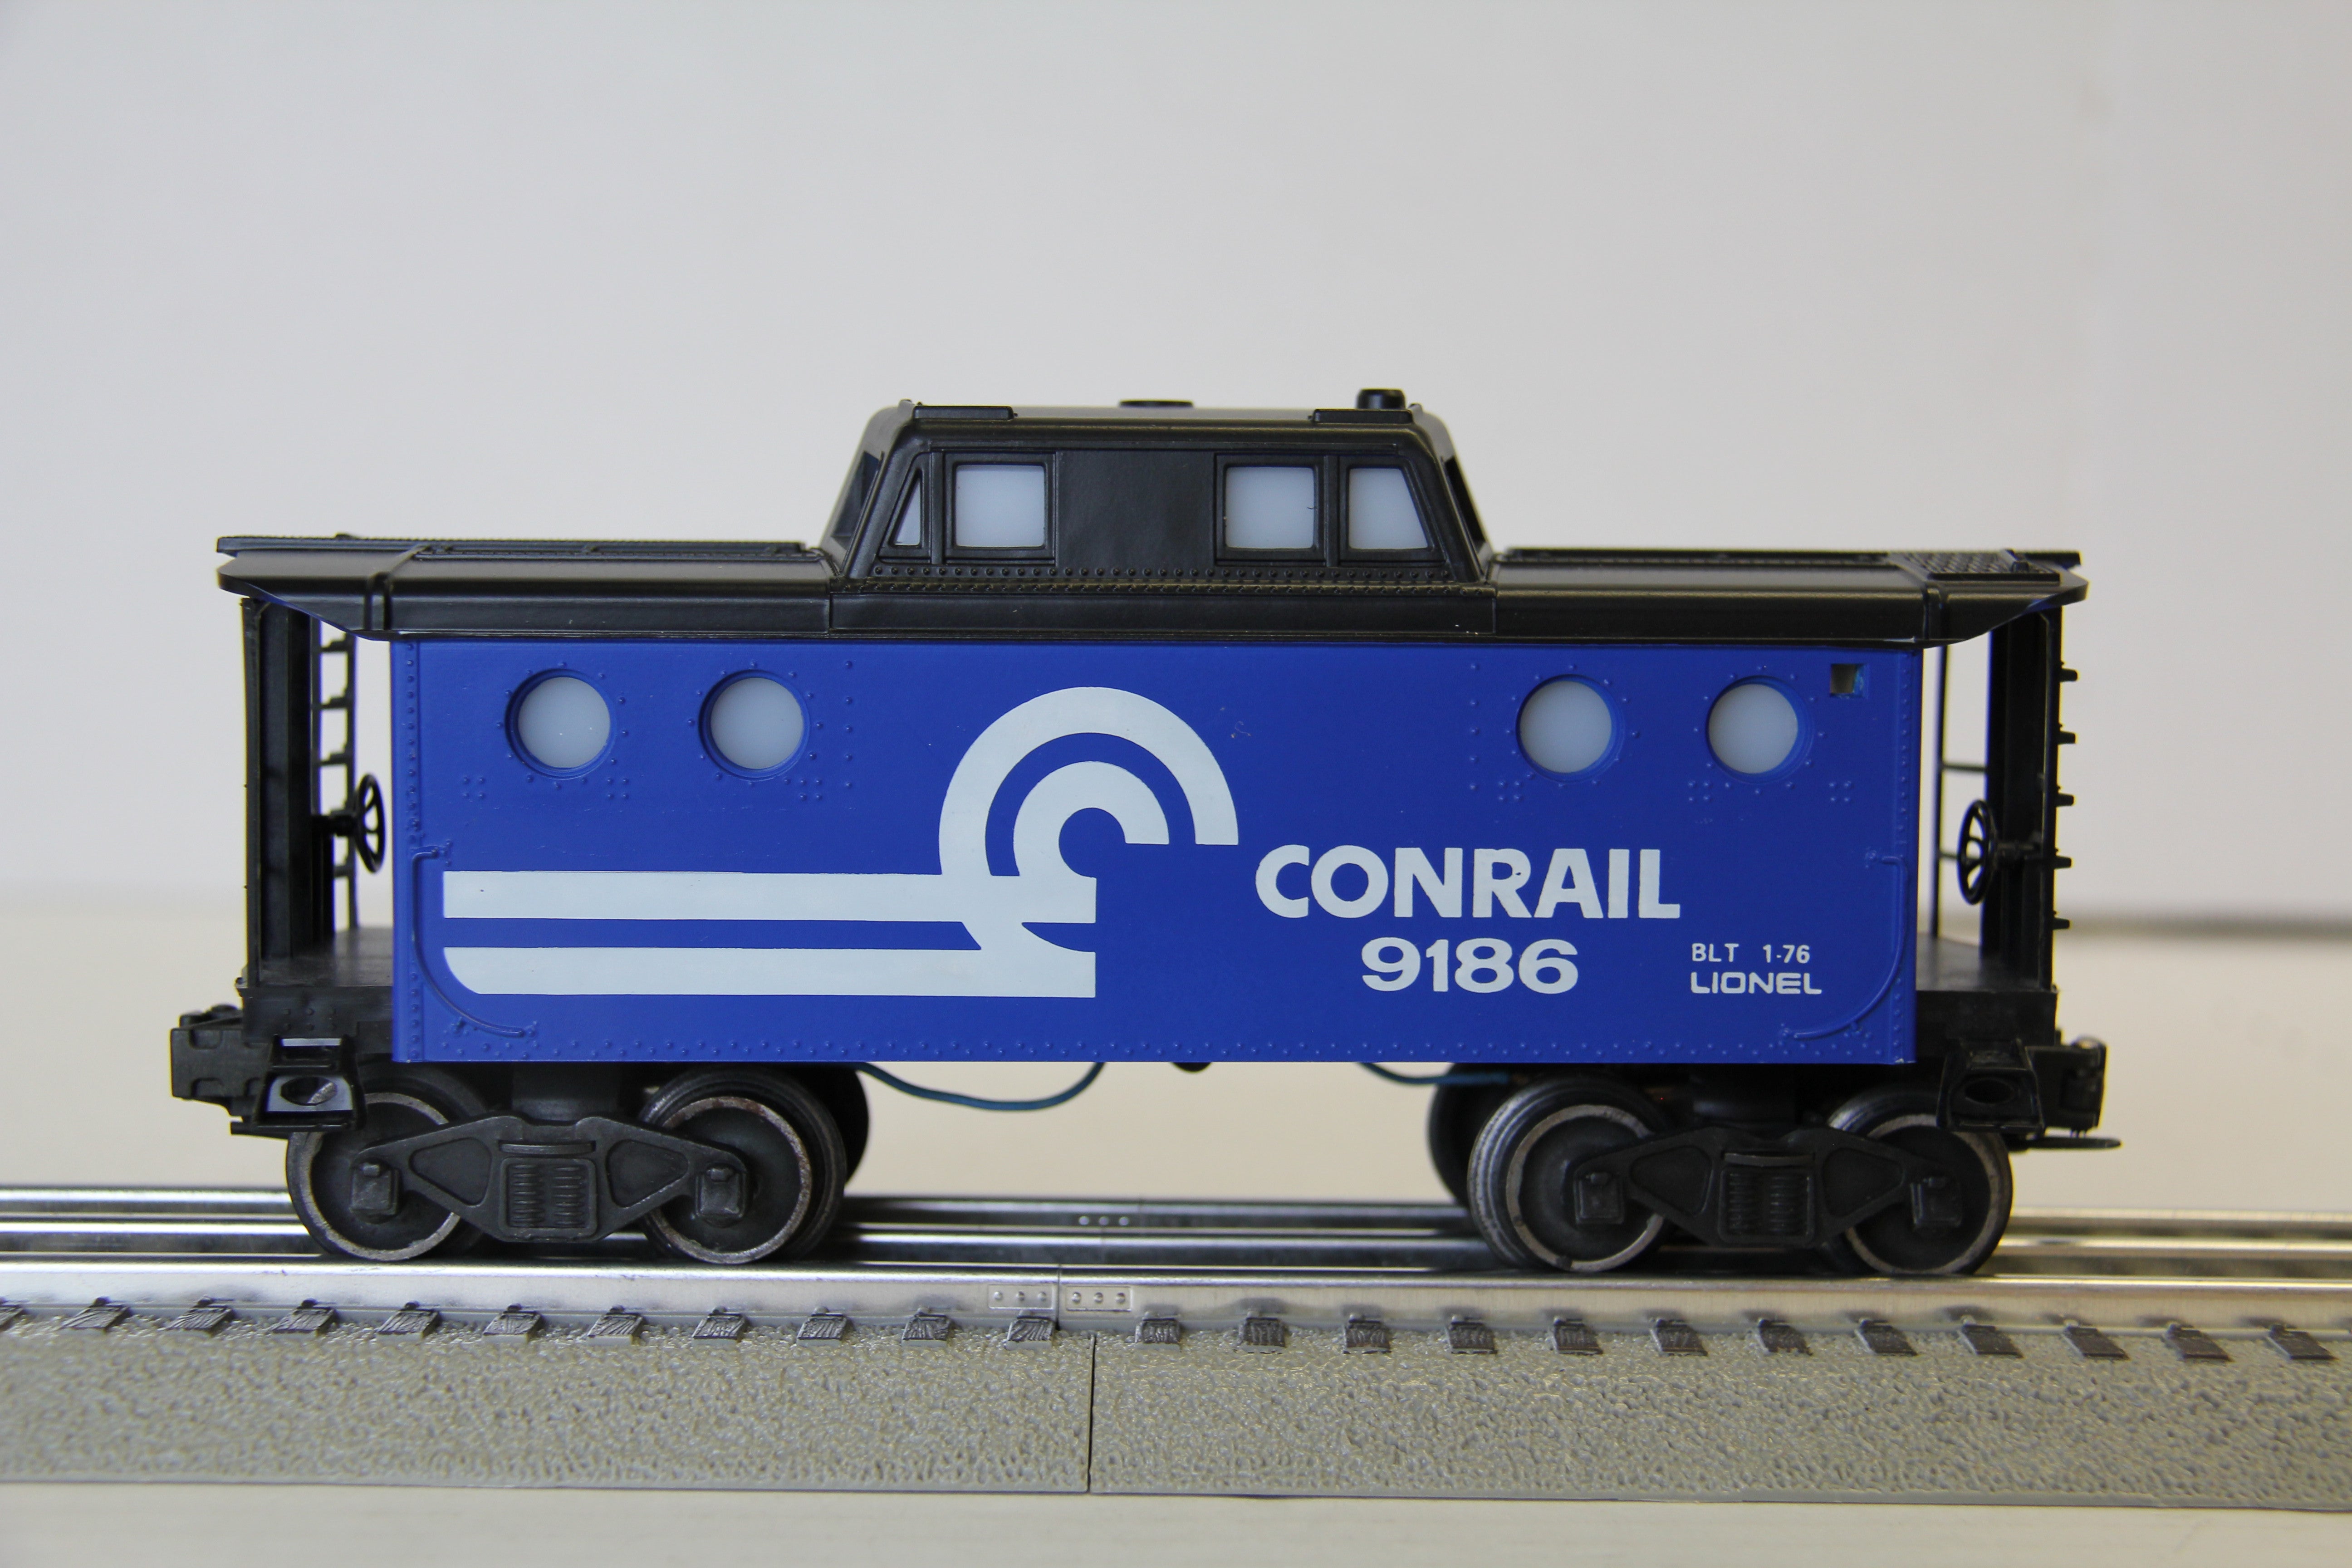 Lionel 6-9186 Conrail Lighted Caboose-Second hand-M4488